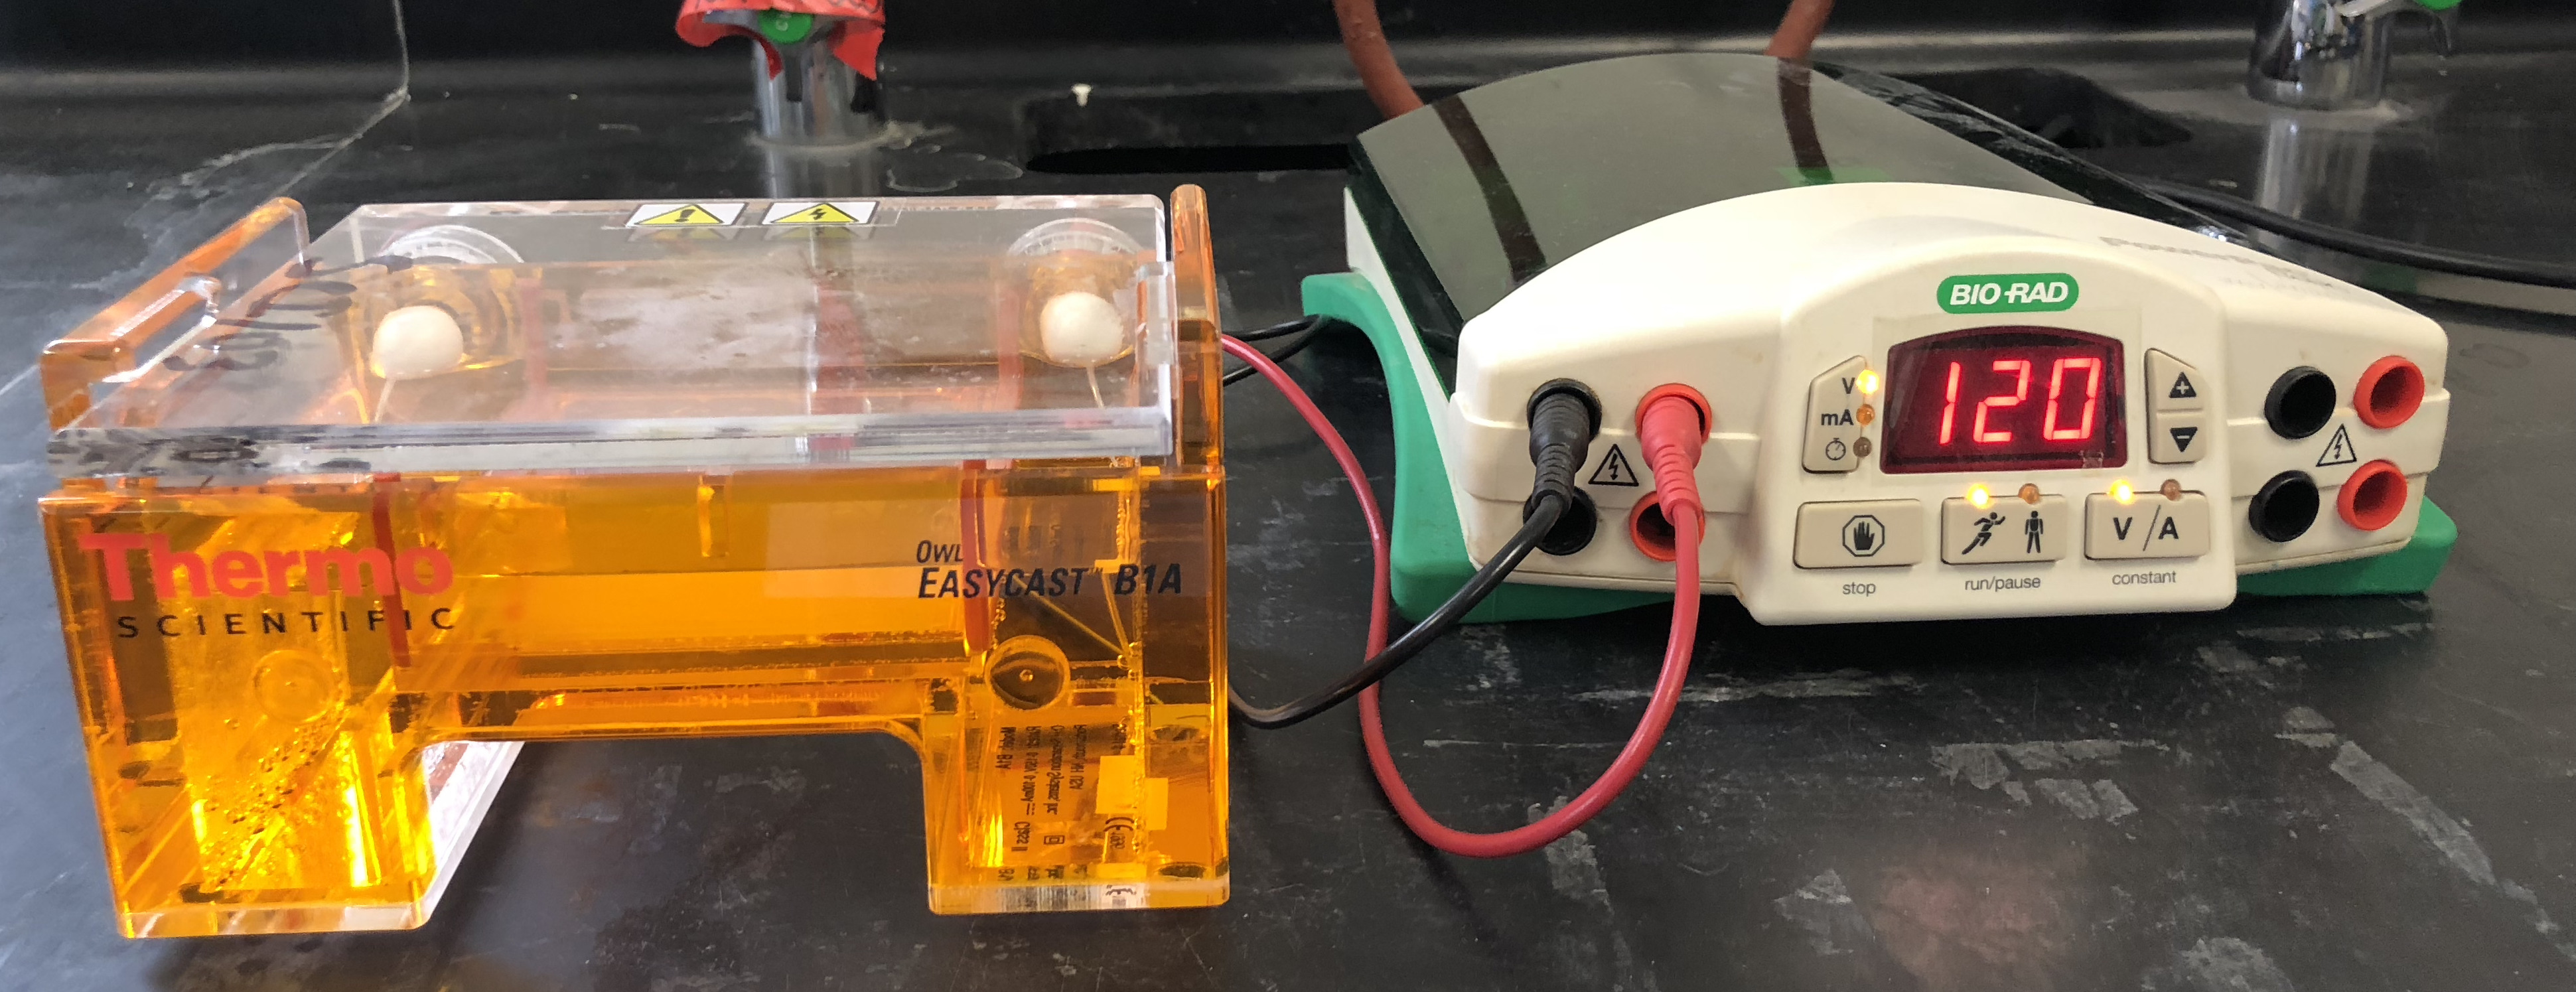 Gel electrophoresis box and power supply.